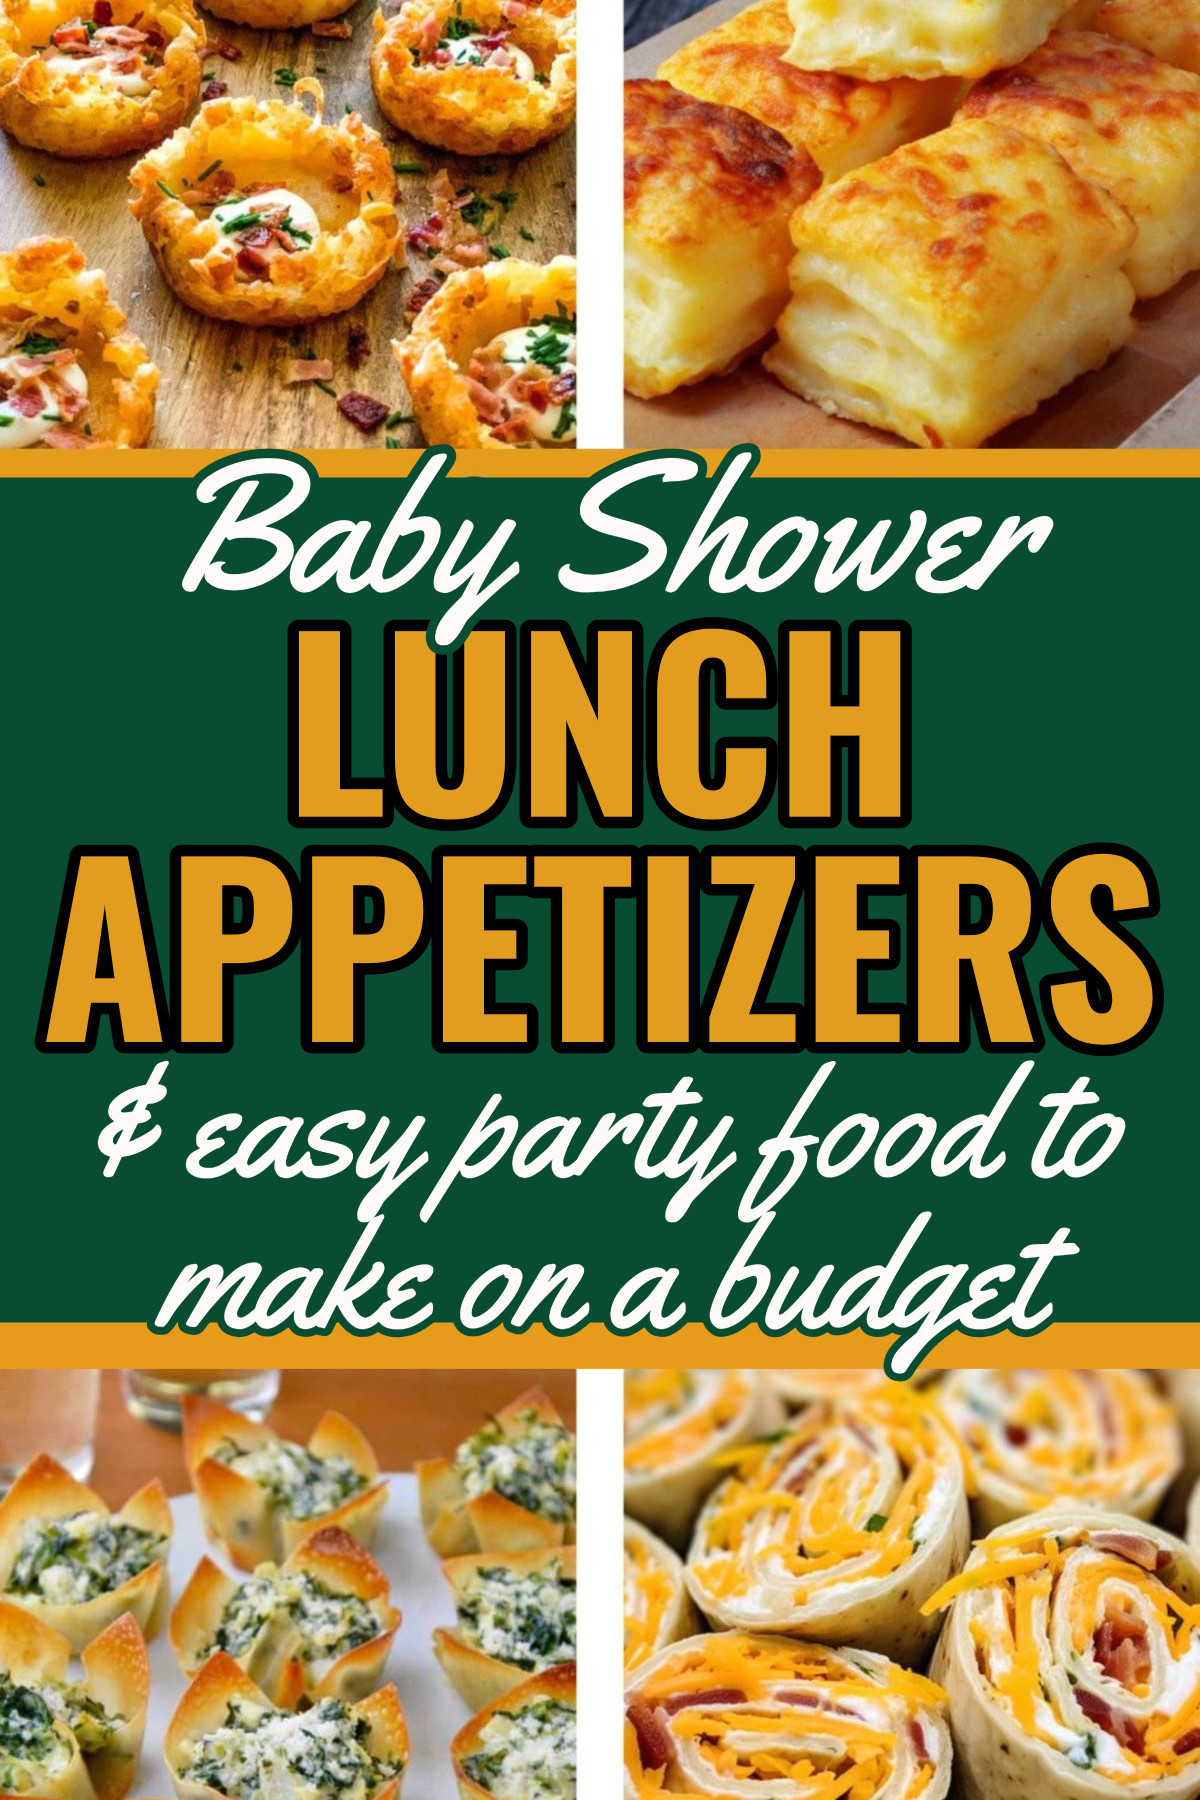 Baby shower lunch appetizers easy party food to make on a budget